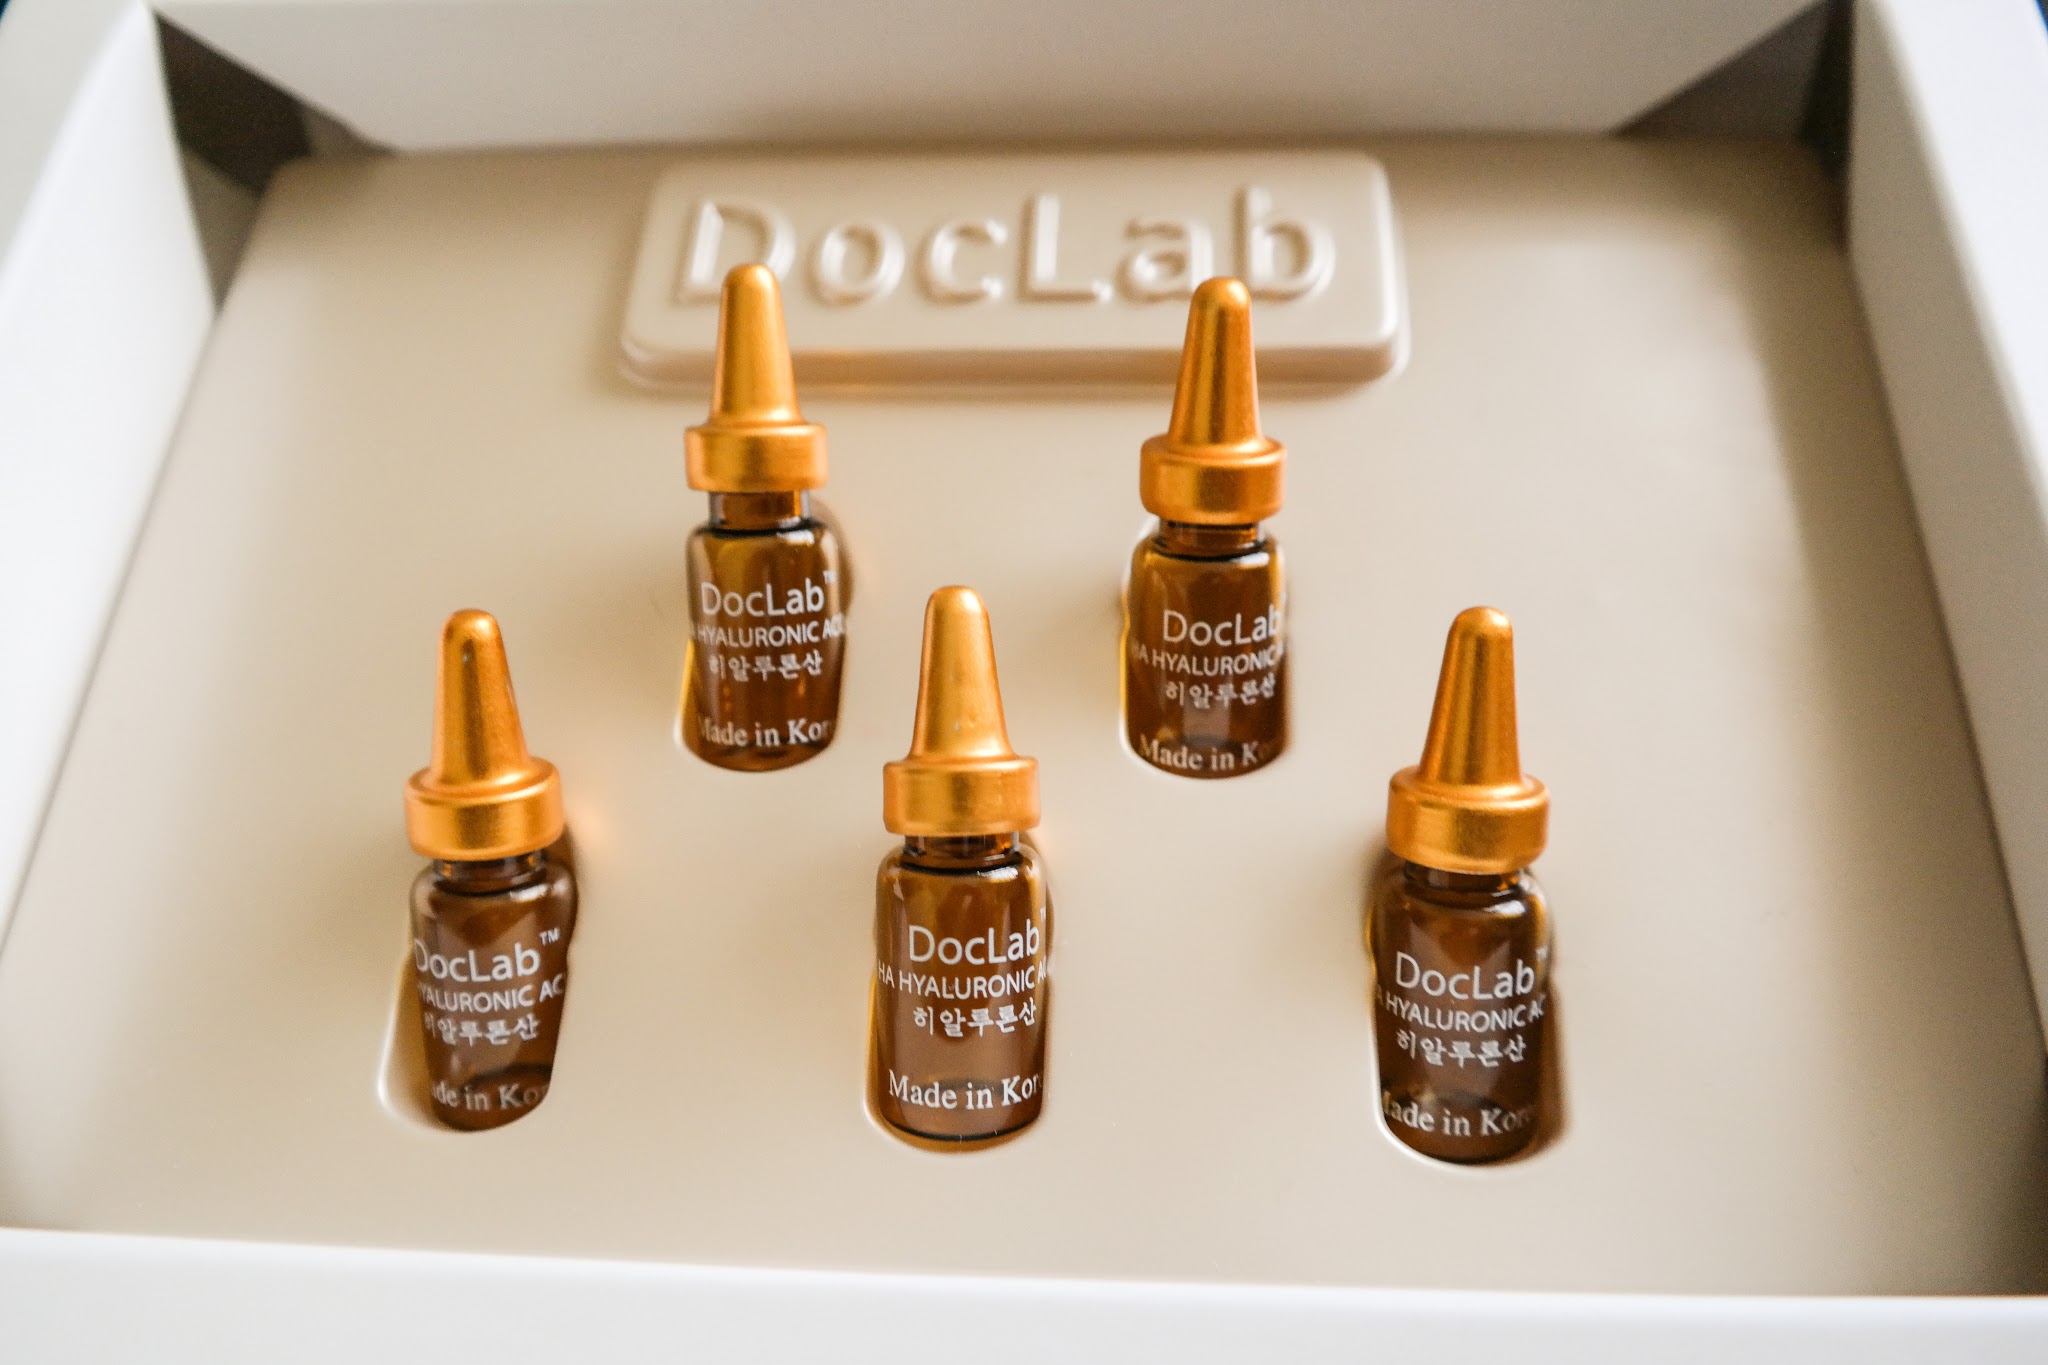 Doclab’s Hyaluronic Acid Face Ampoules, Doclab’s Hyaluronic Acid Face Ampoules, malaysia best face ampoules, best face ampoules, efficient face ampoules,